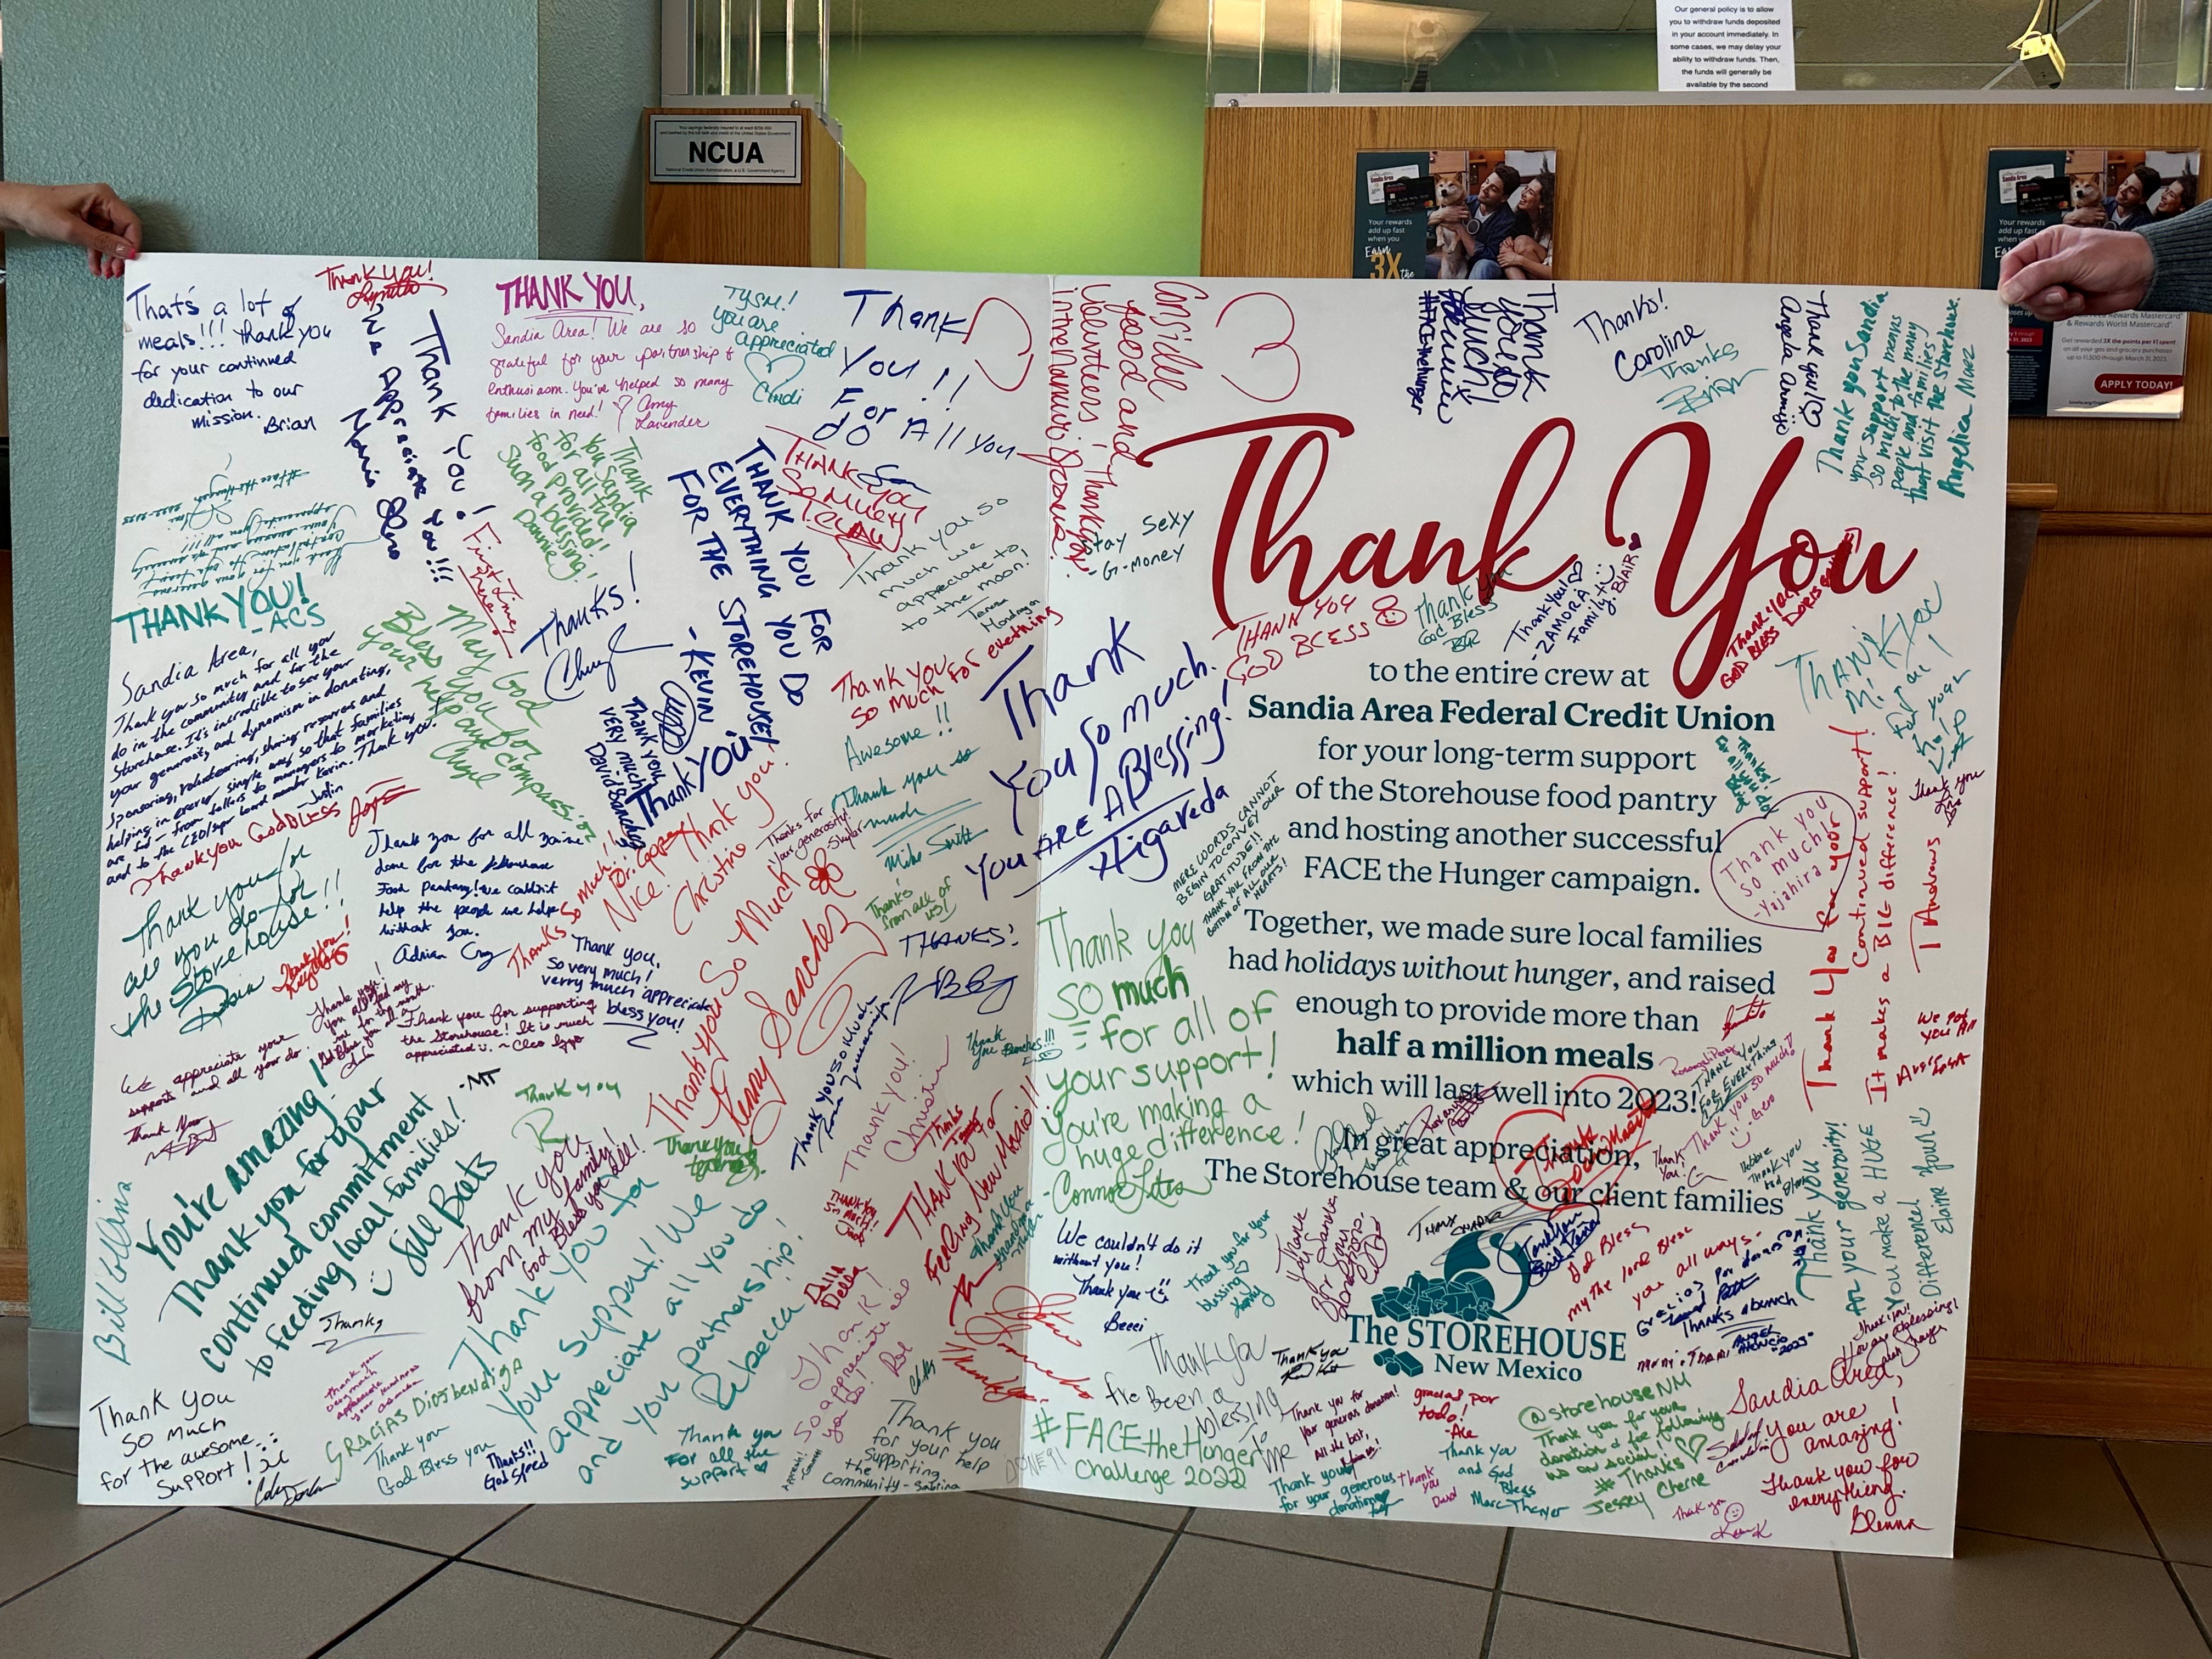 giant thank you card filled with signatures stands open